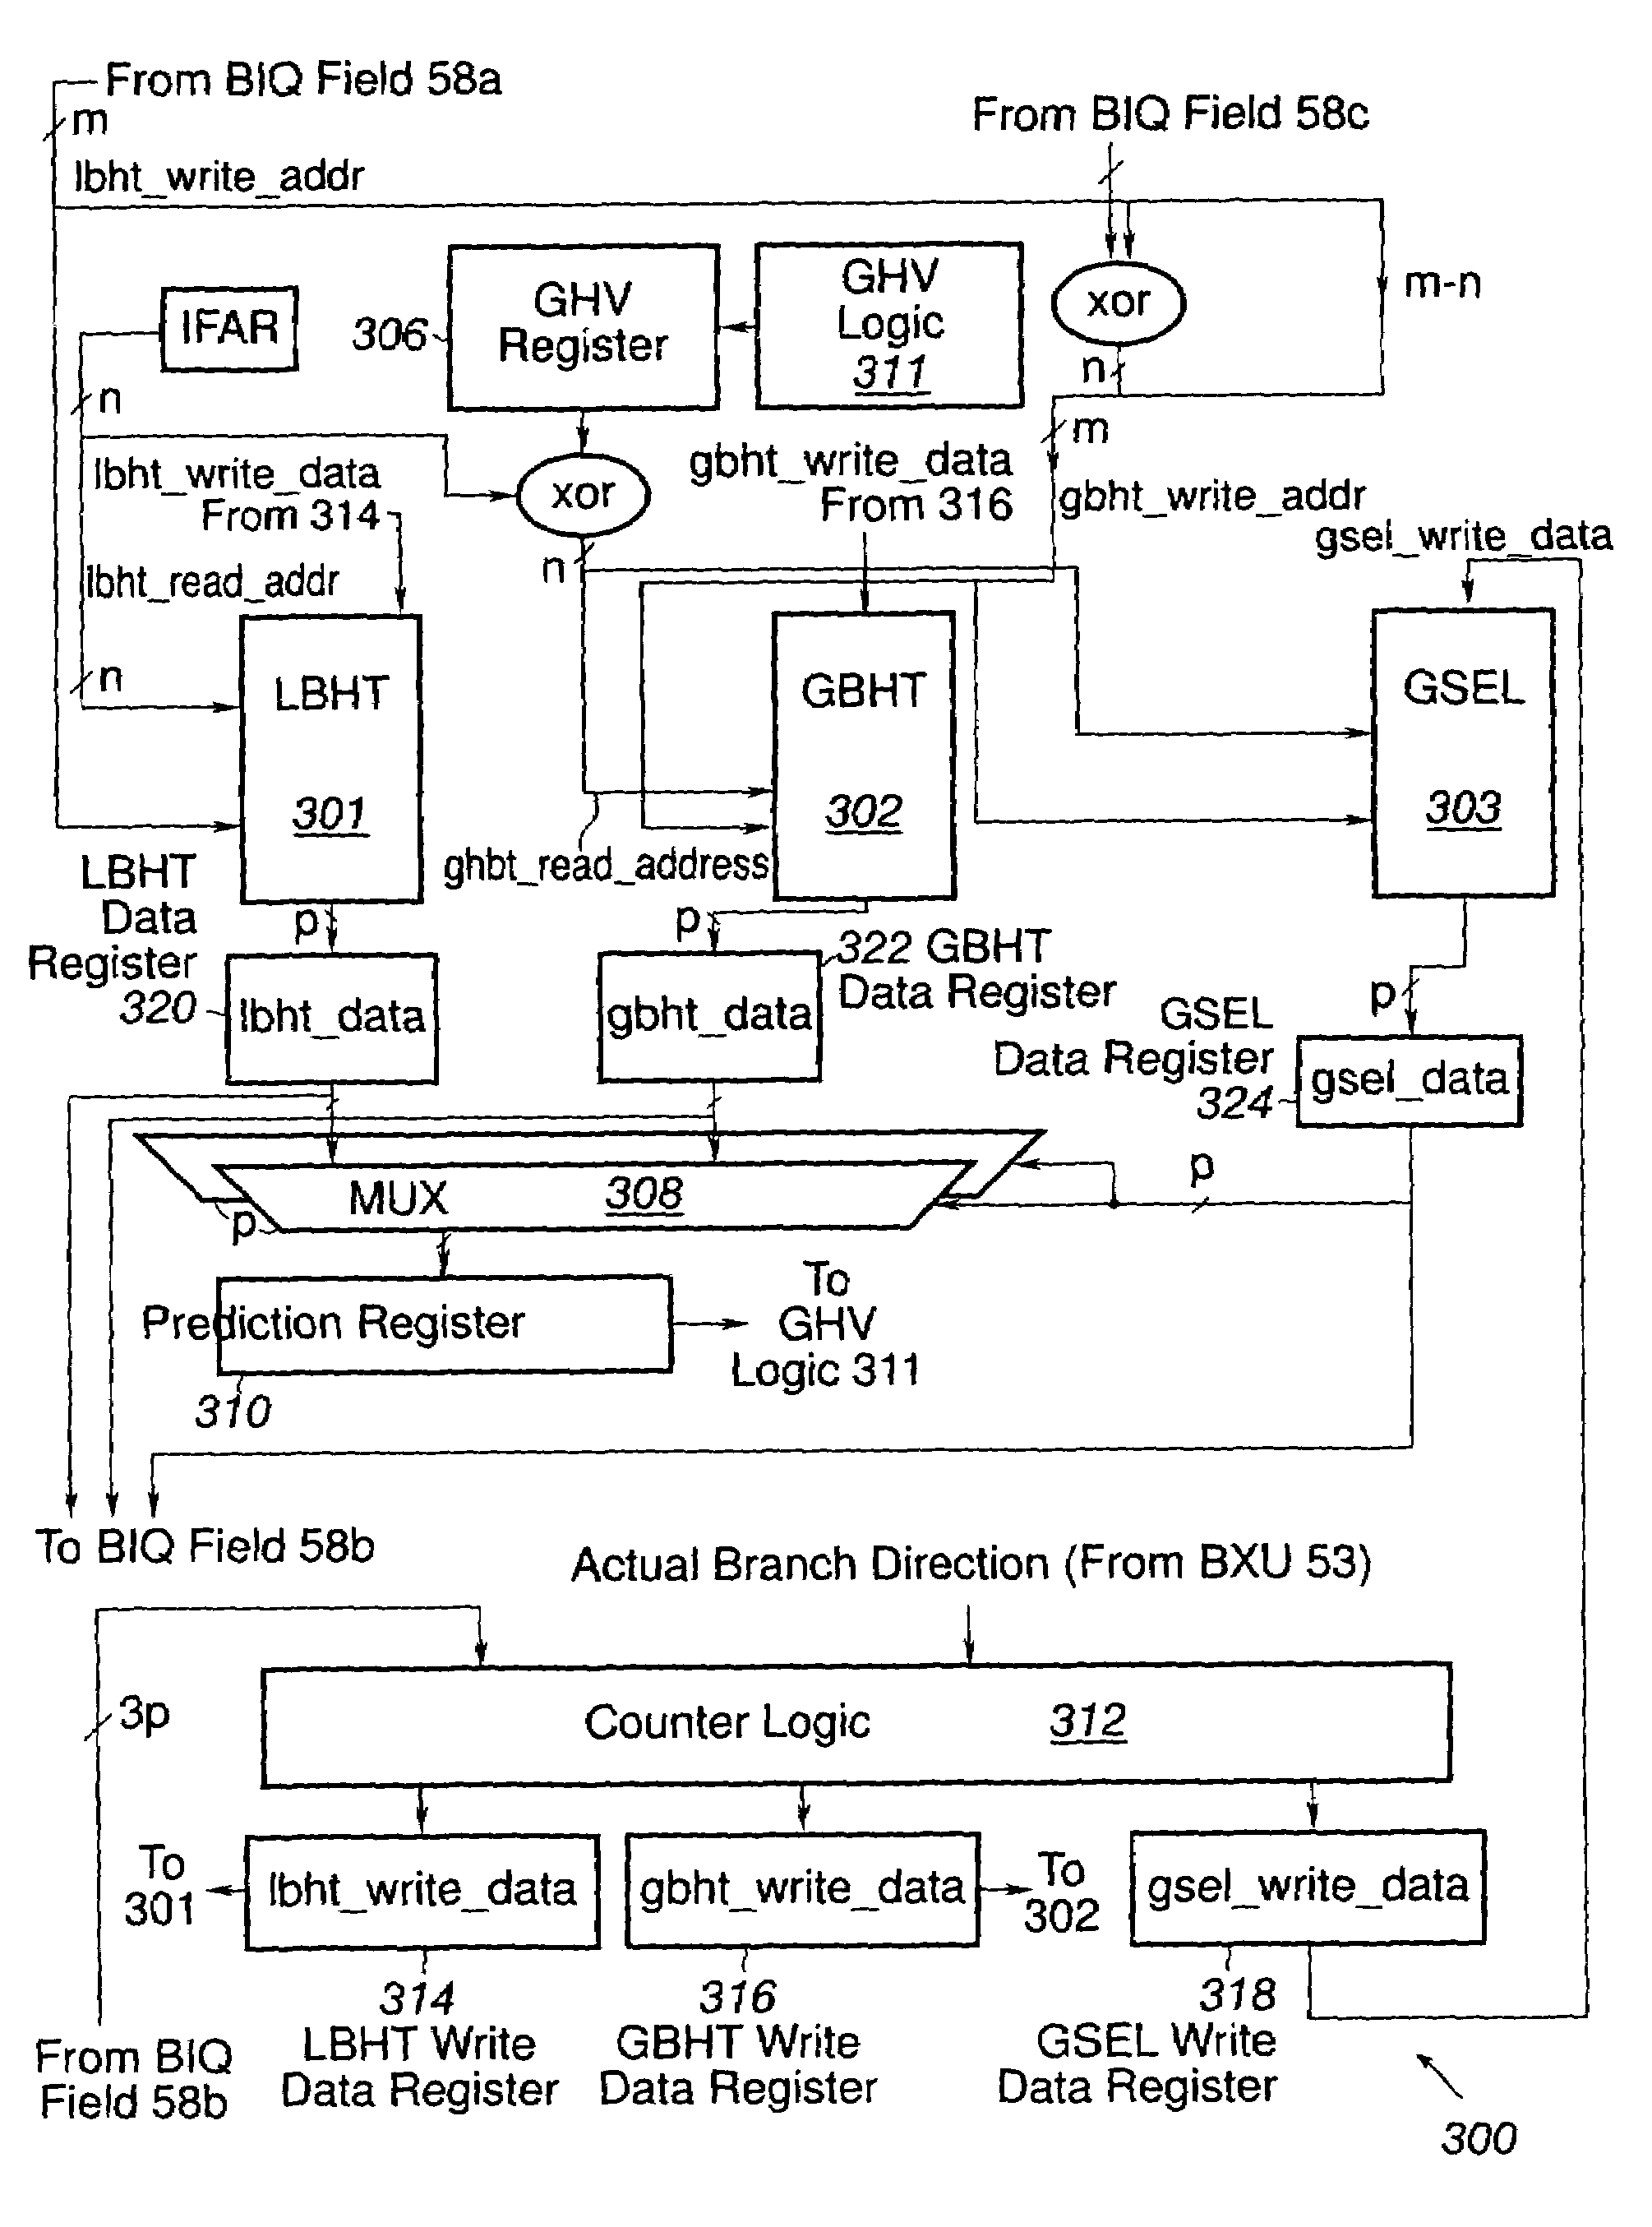 Circuits, systems and methods for performing branch predictions by selectively accessing bimodal and fetch-based history tables